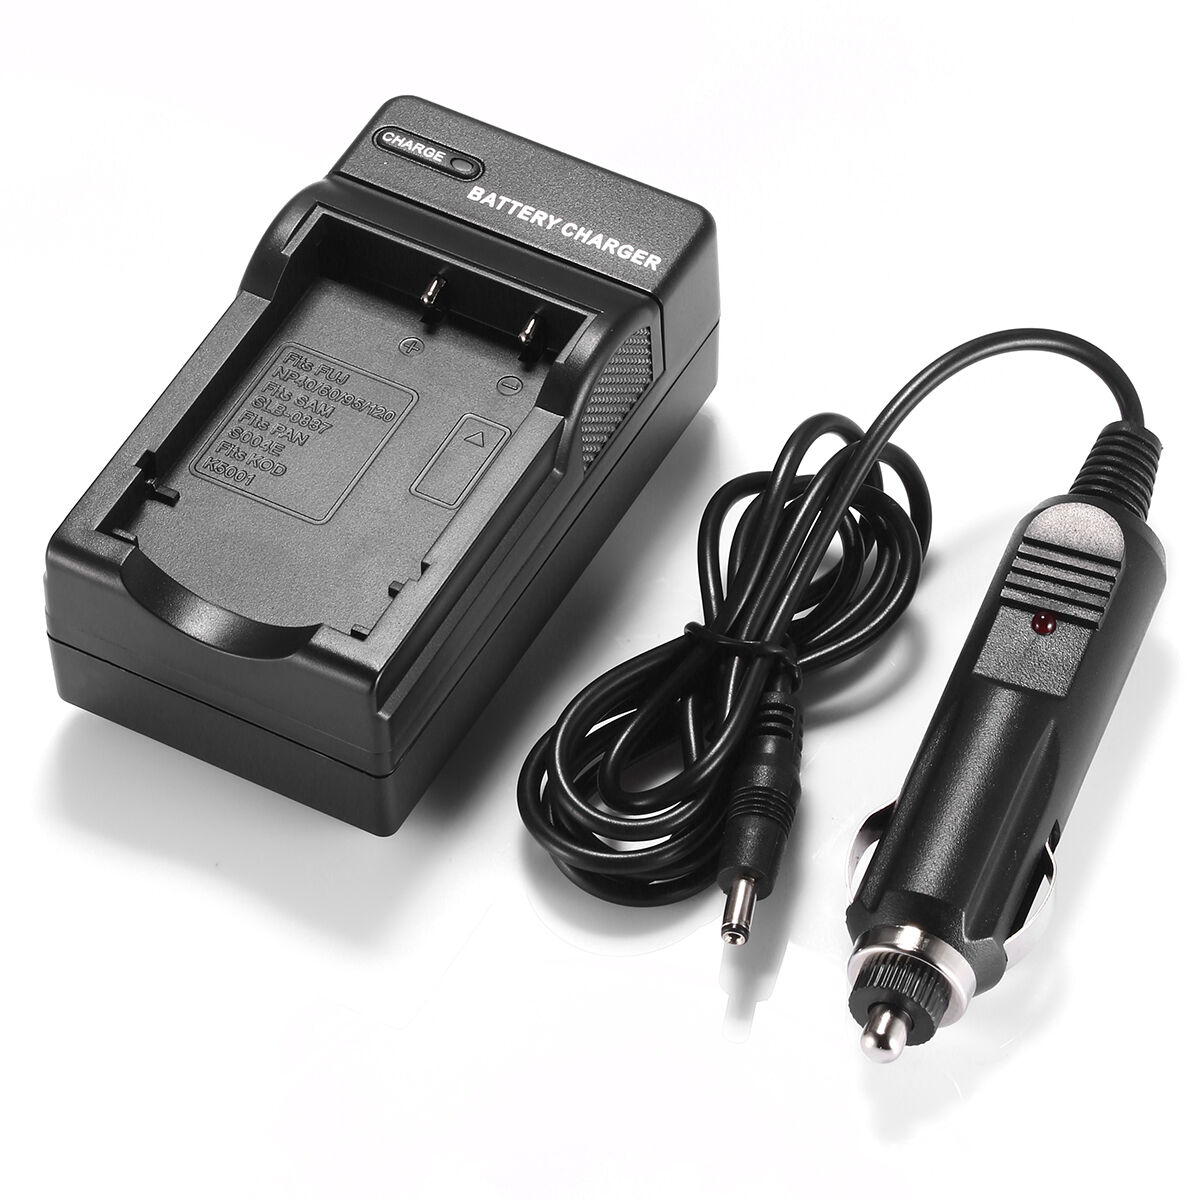 SONY Mylo COM-1 battery charger